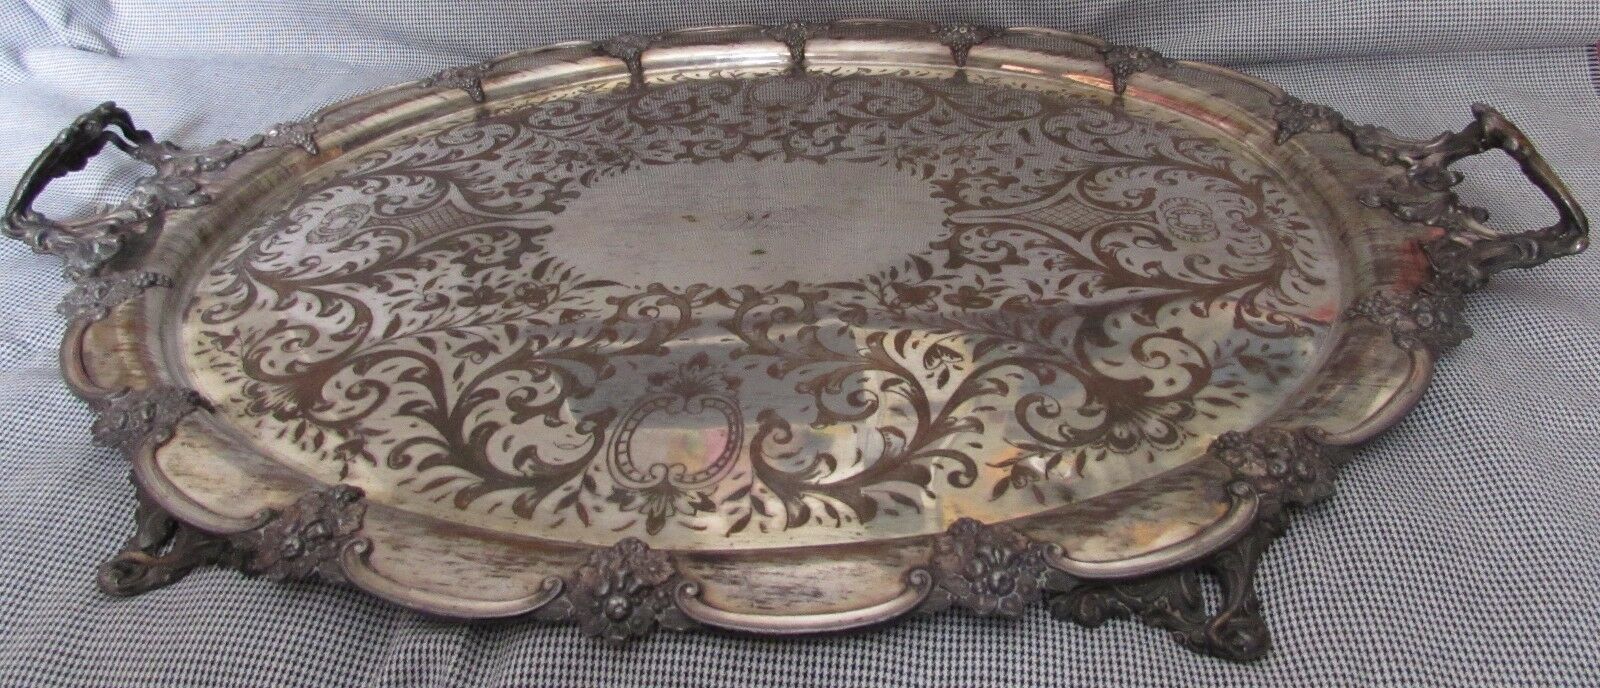 Antique Silverplate Tray Massive 31 inches long & 6 Legs Victorian Scrolled